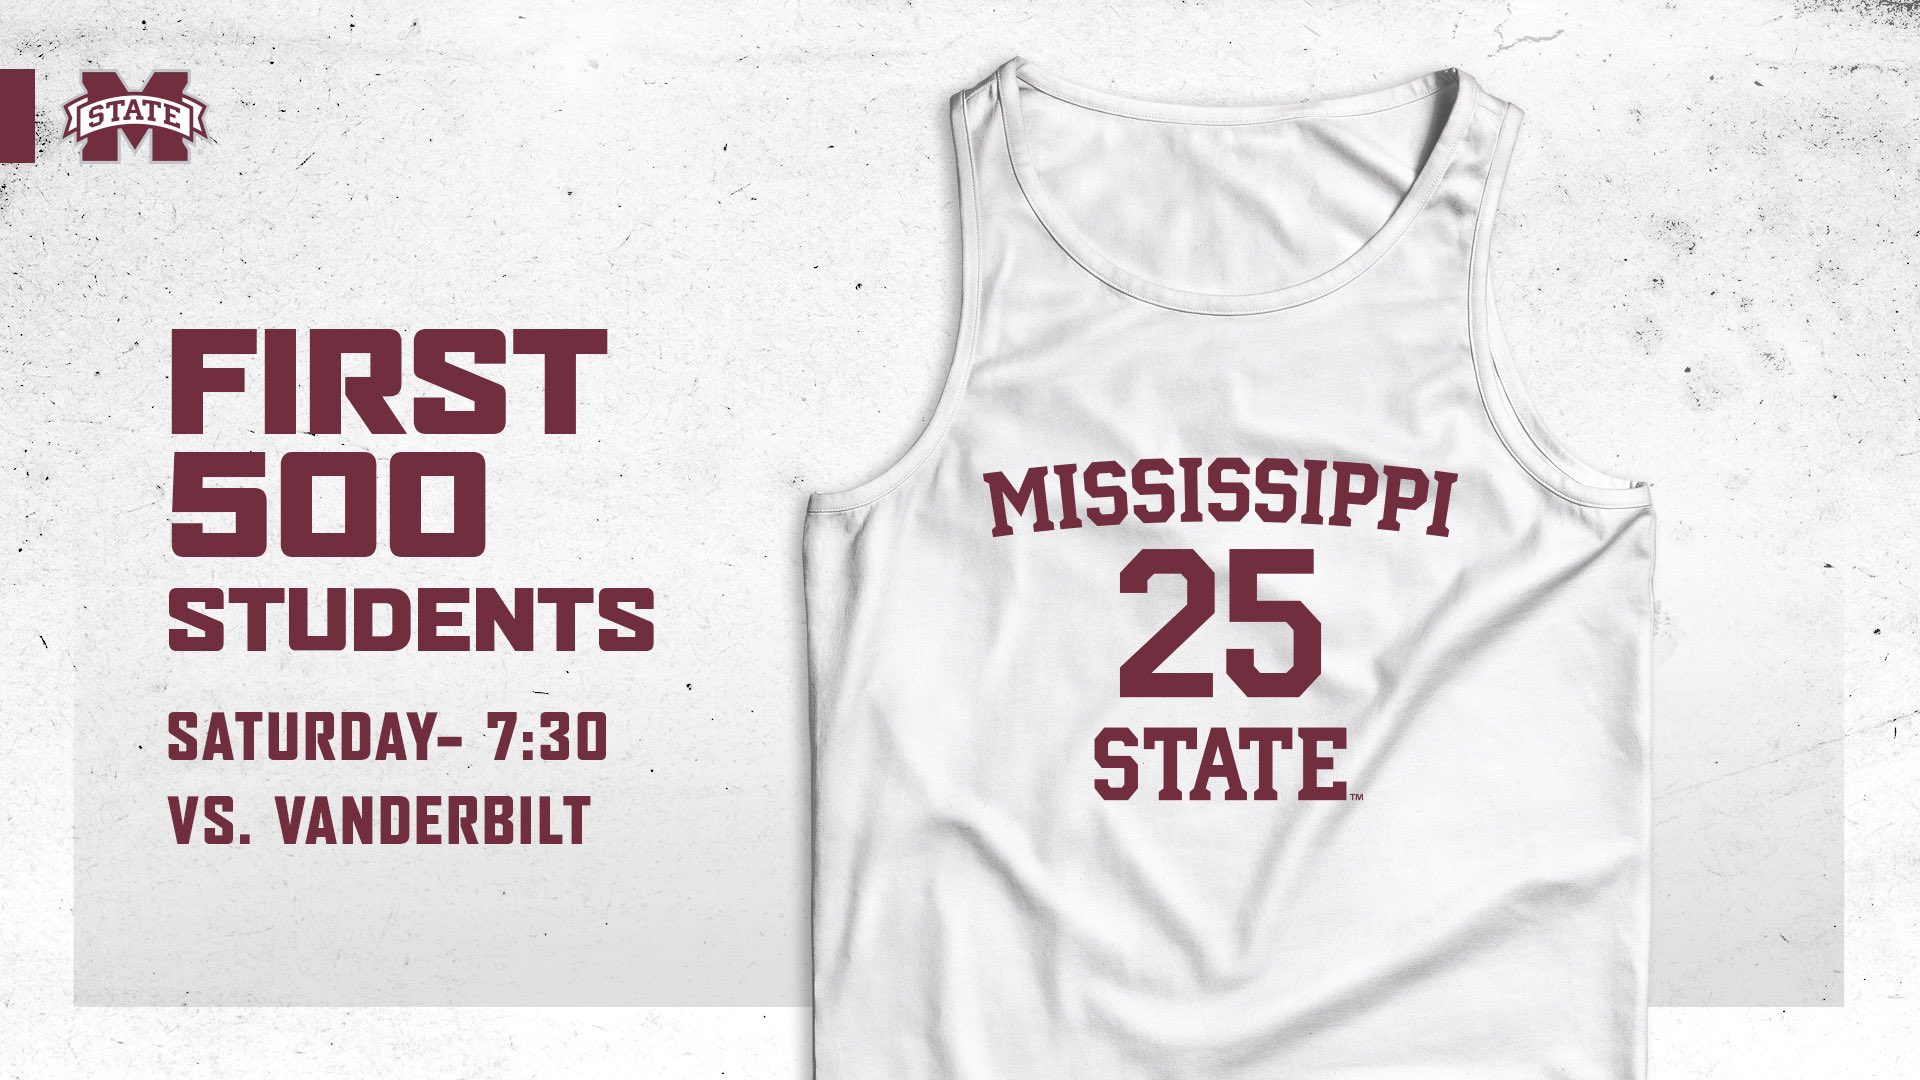 Promotional graphic for men's basketball White Out T-shirt giveaway